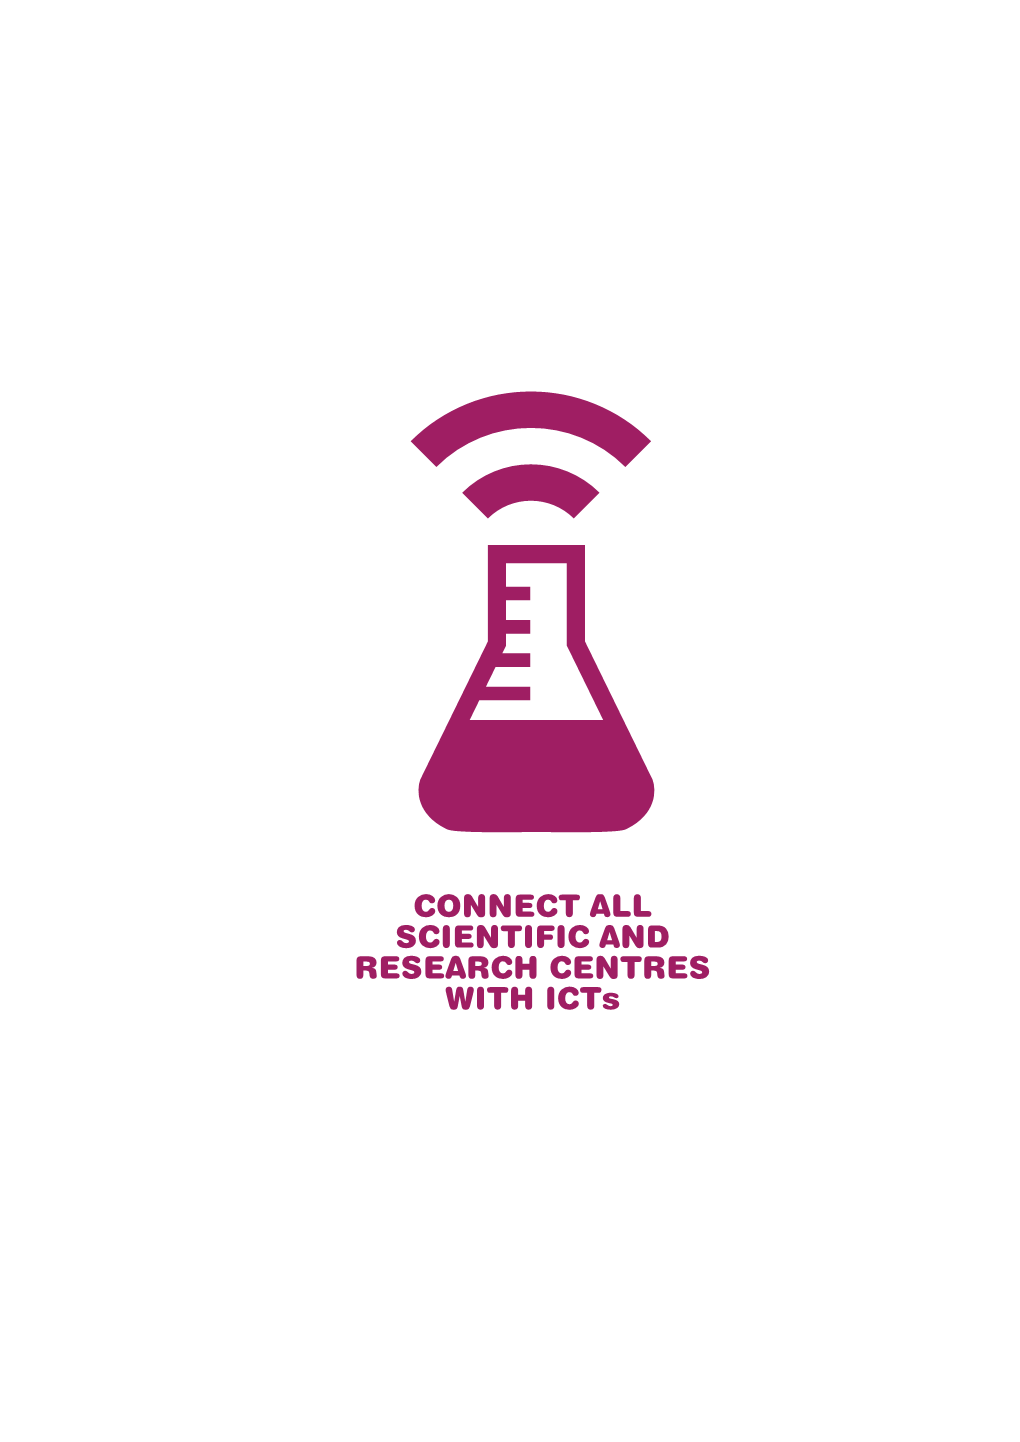 Target 3: Connect All Scientific and Research Centres with Icts1